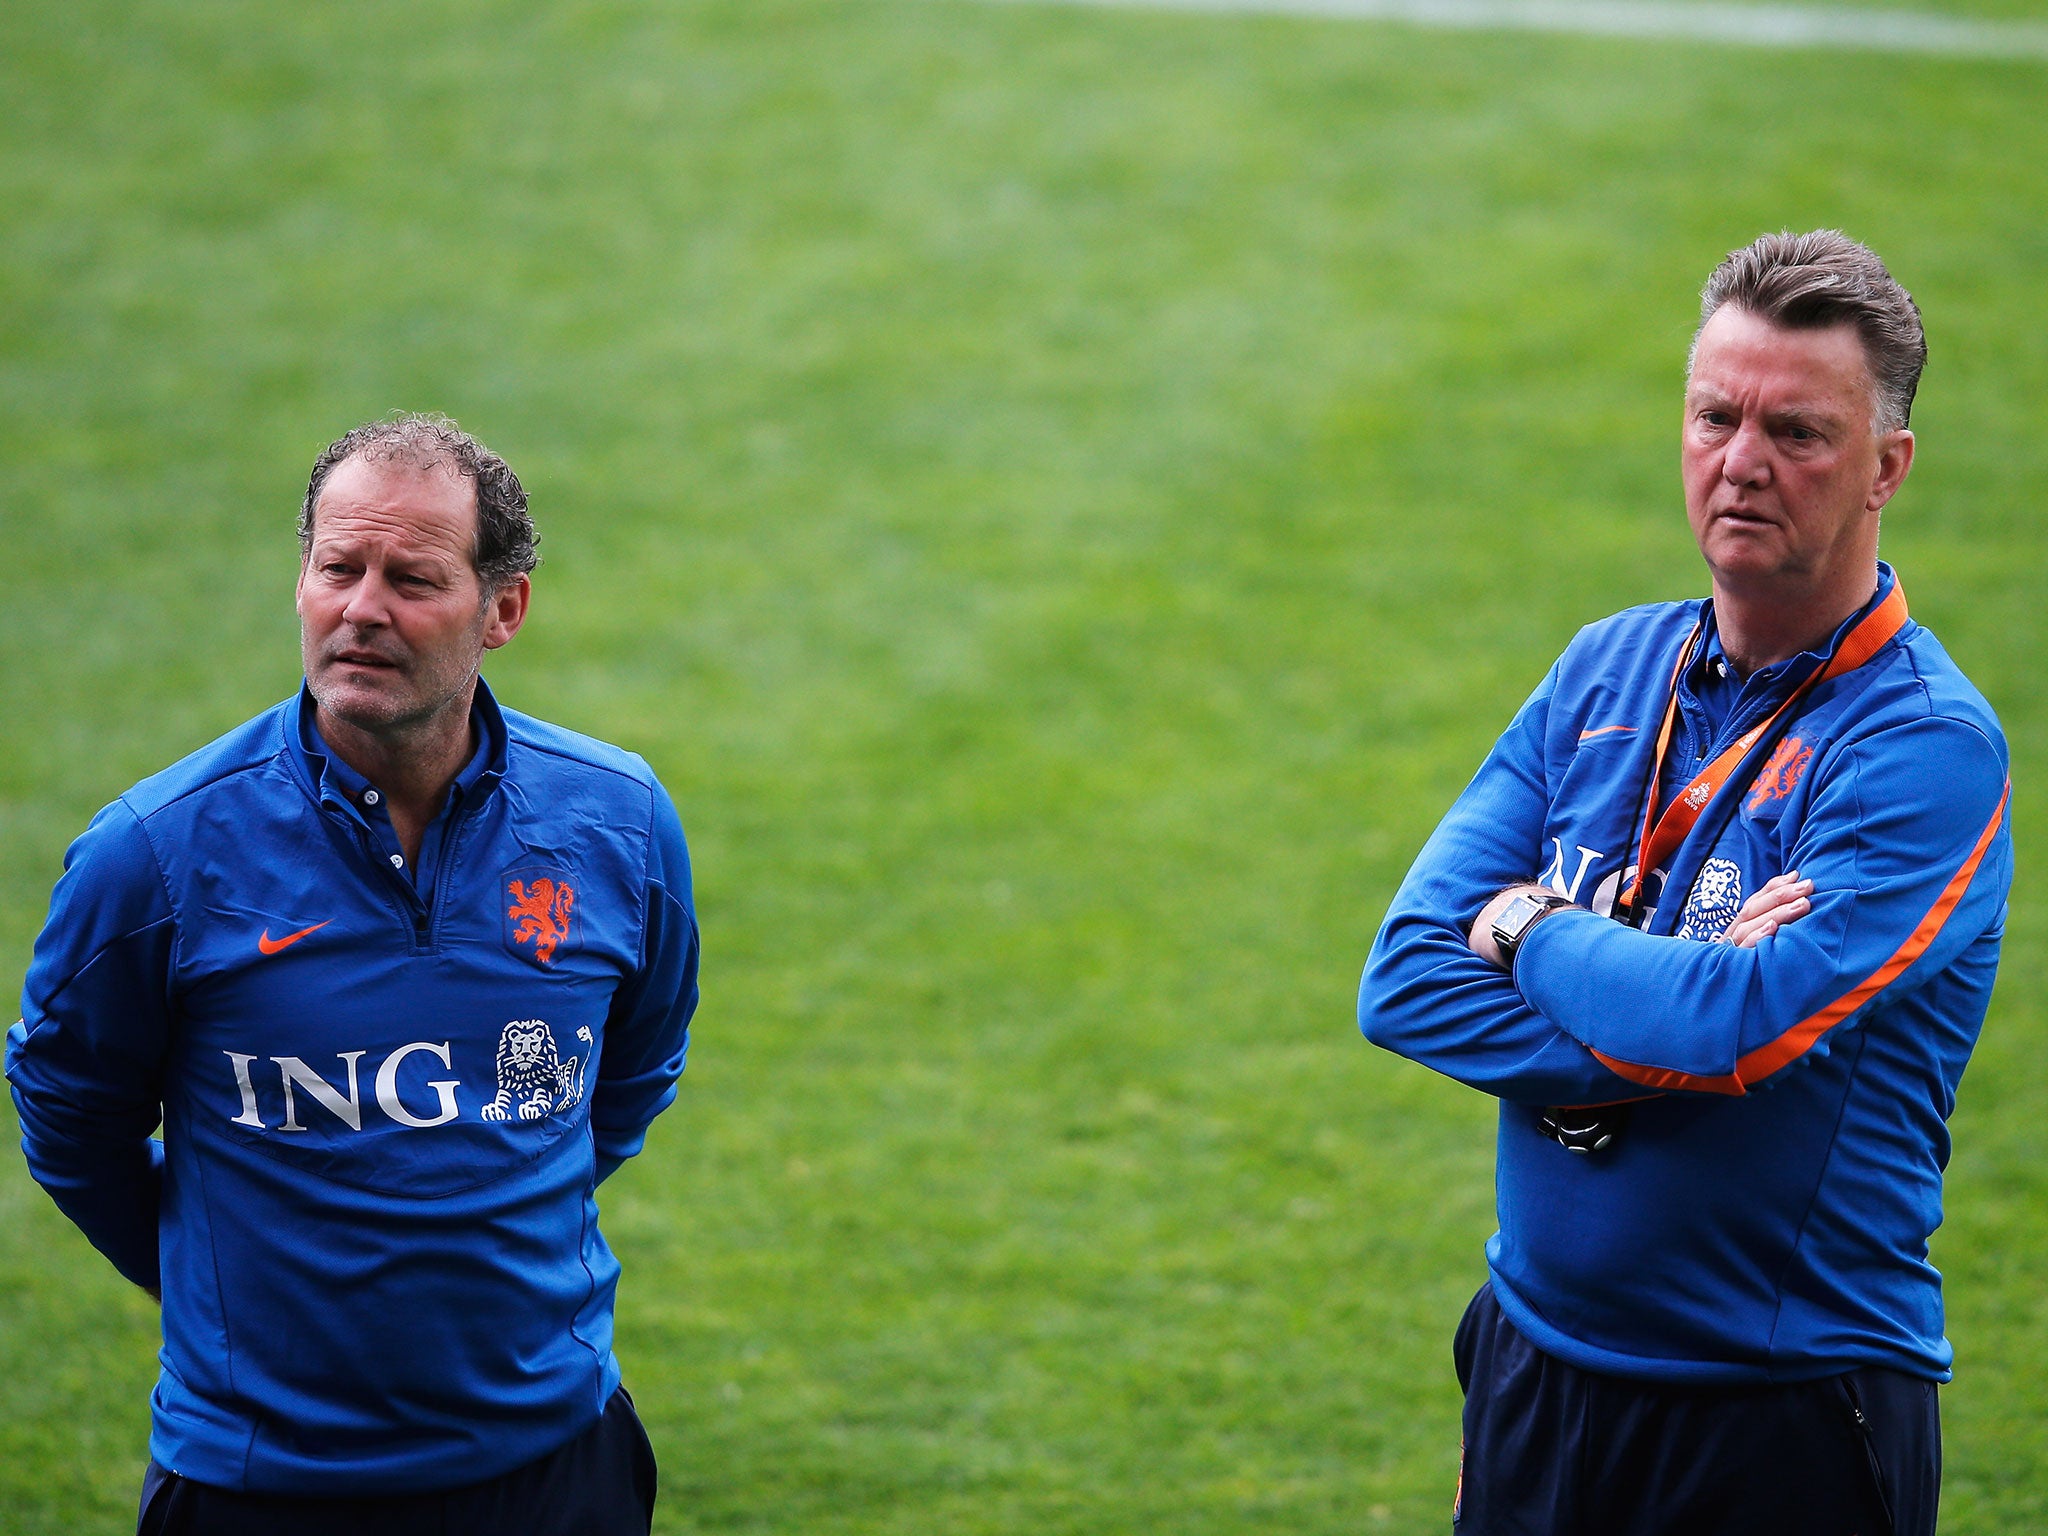 Danny Blind (left) will take over after Euro 2016 - but it could be sooner